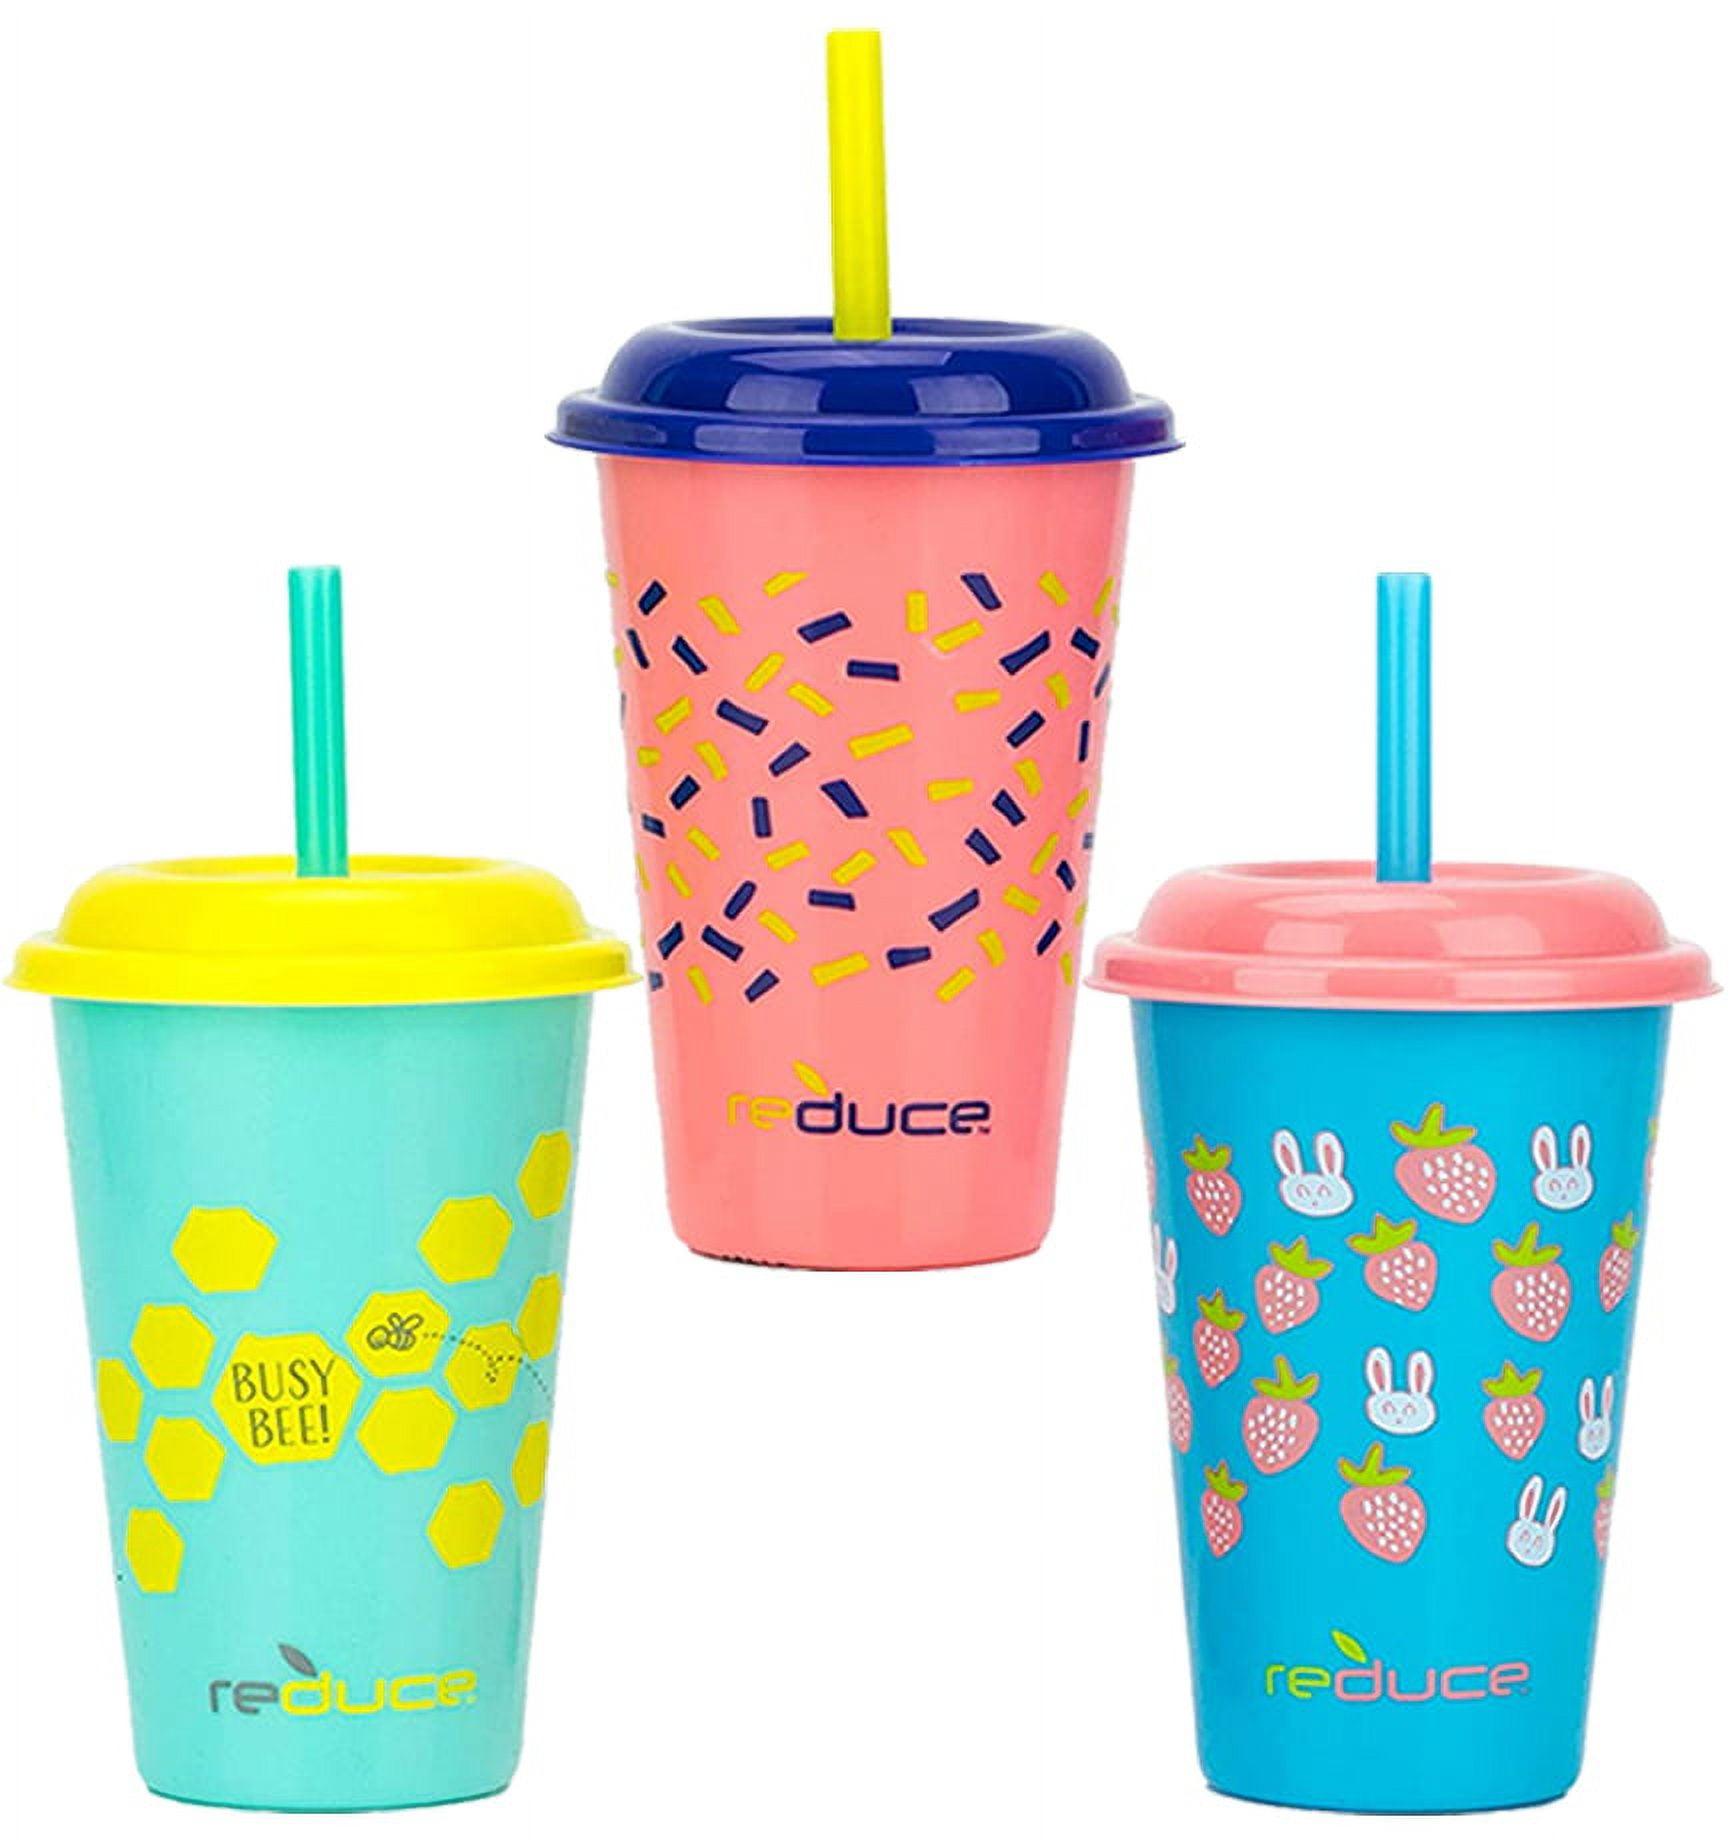 Reduce GoGo's, 3 Pack Set â€“ 12oz Kids Cups with Straws and